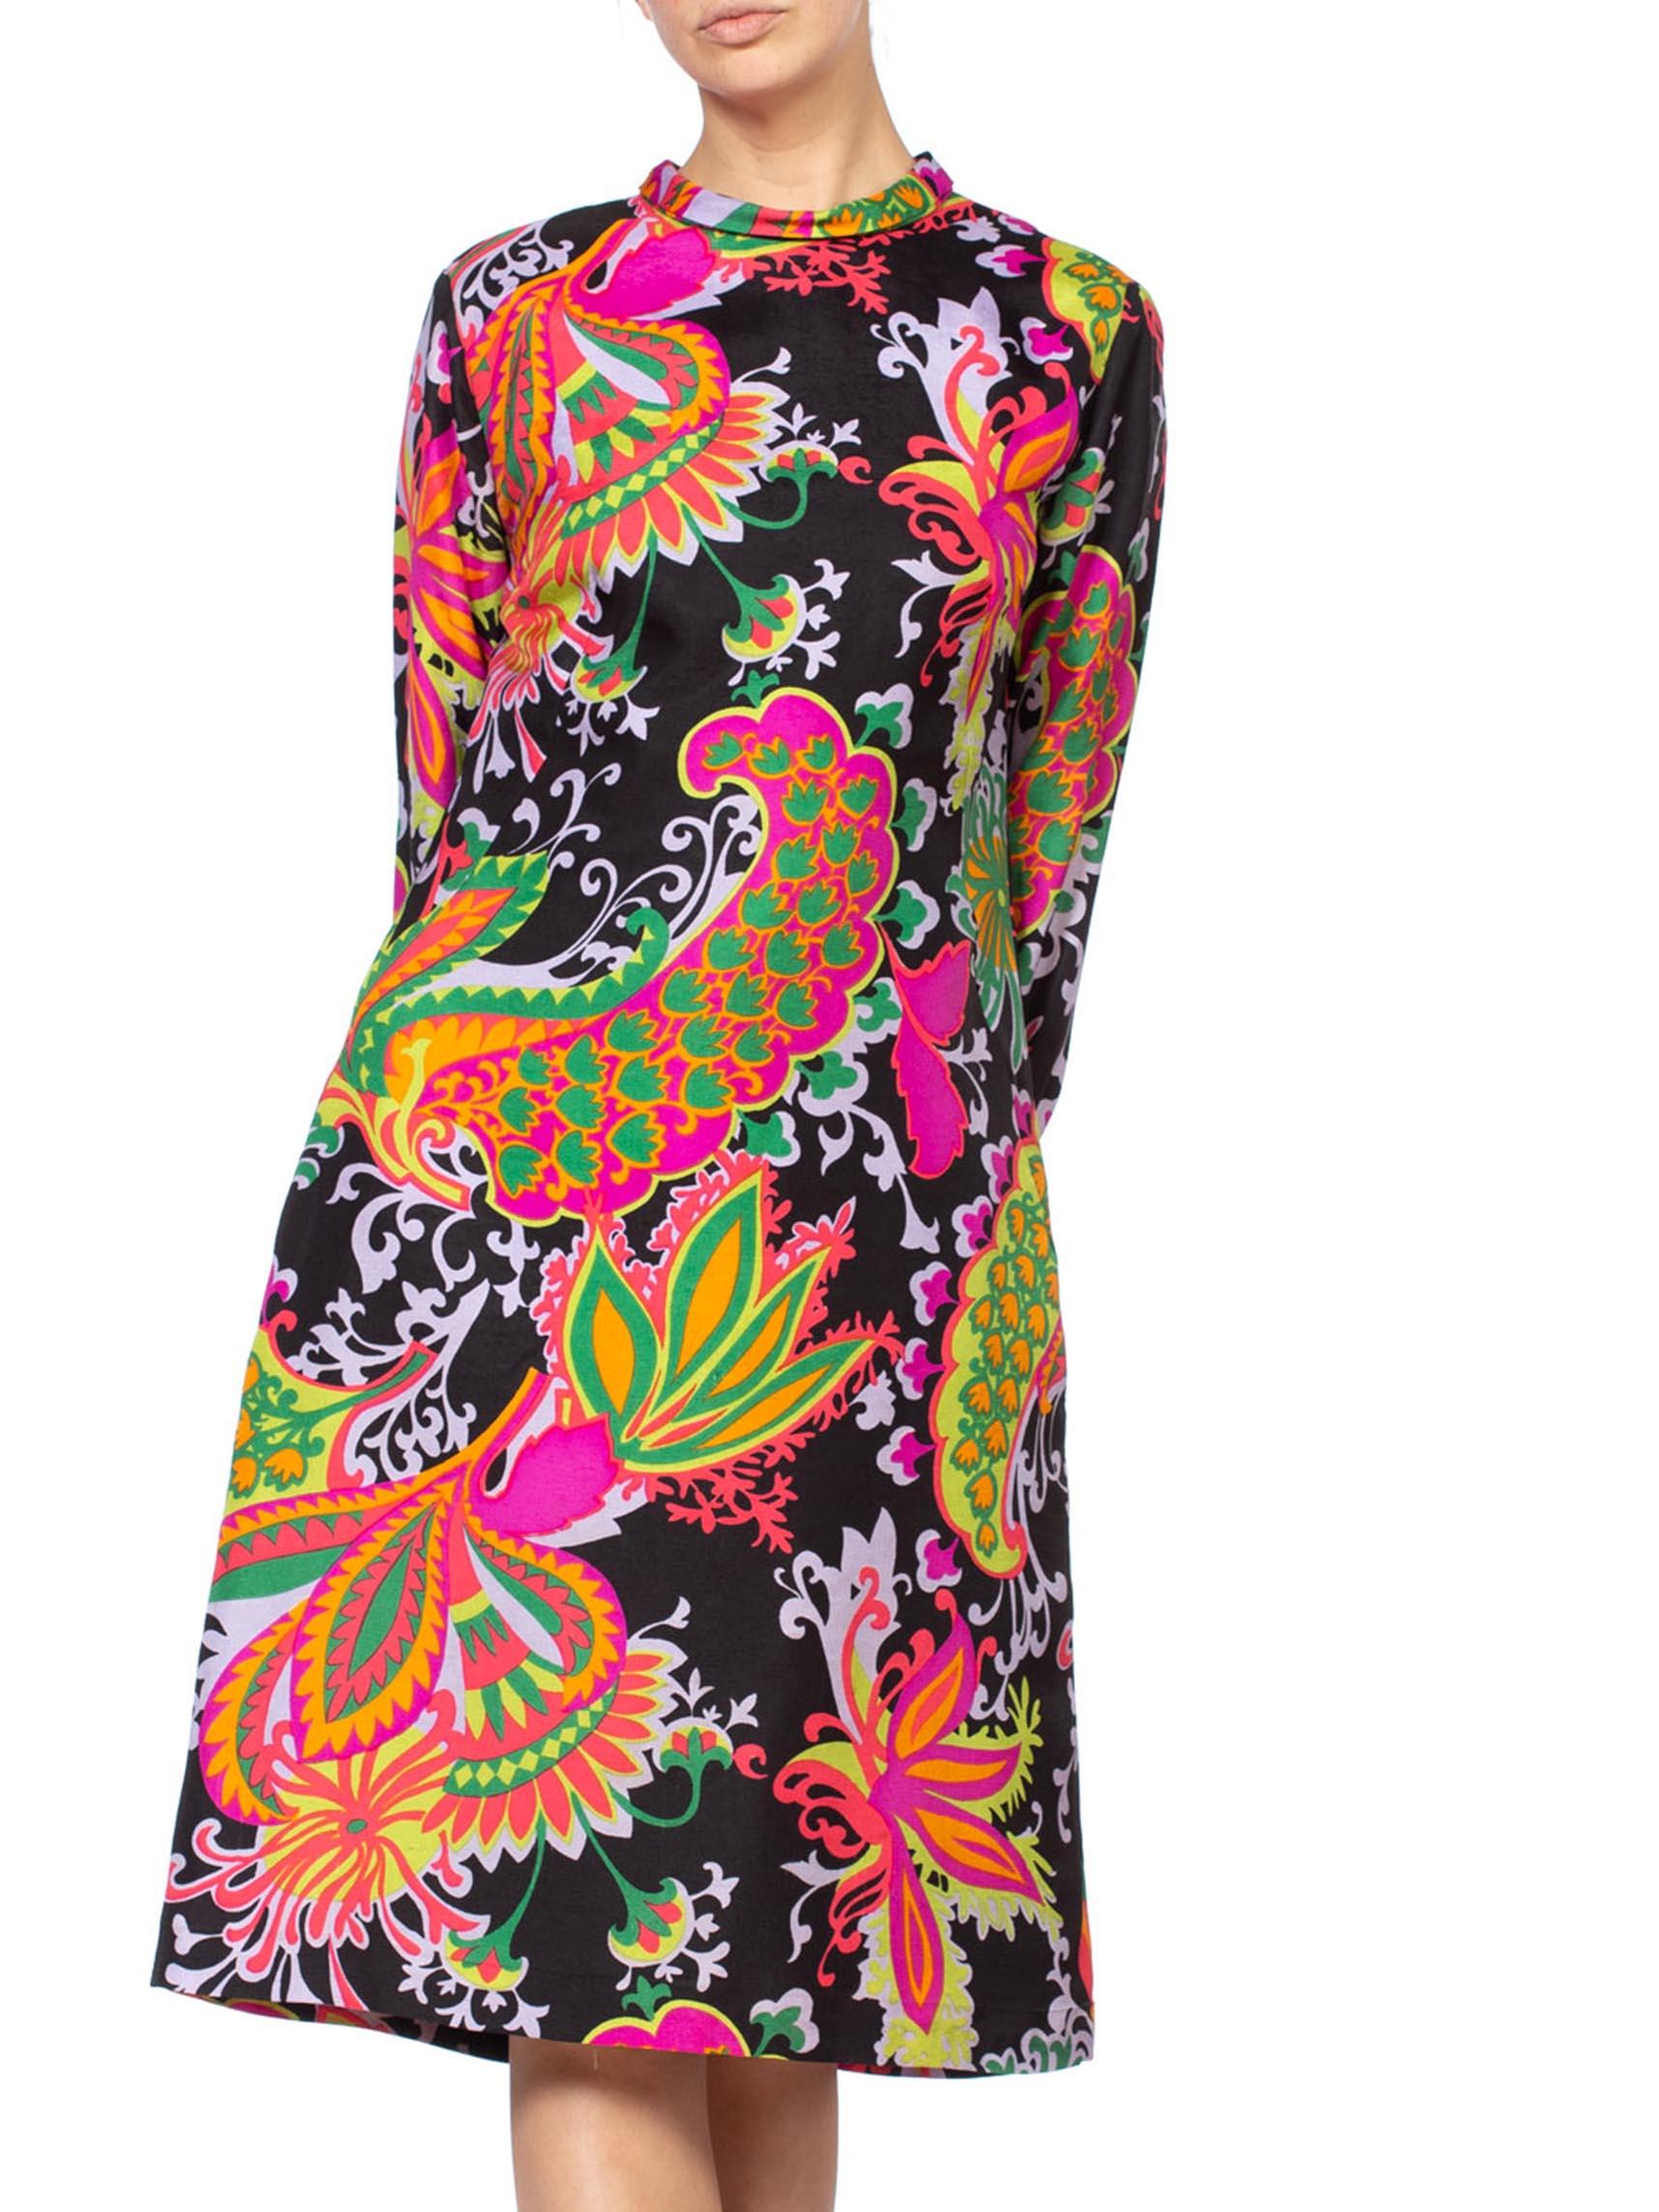 1960'S 1960/70'S Mod Psychedelic Neon Floral Paisley Dress In Excellent Condition For Sale In New York, NY